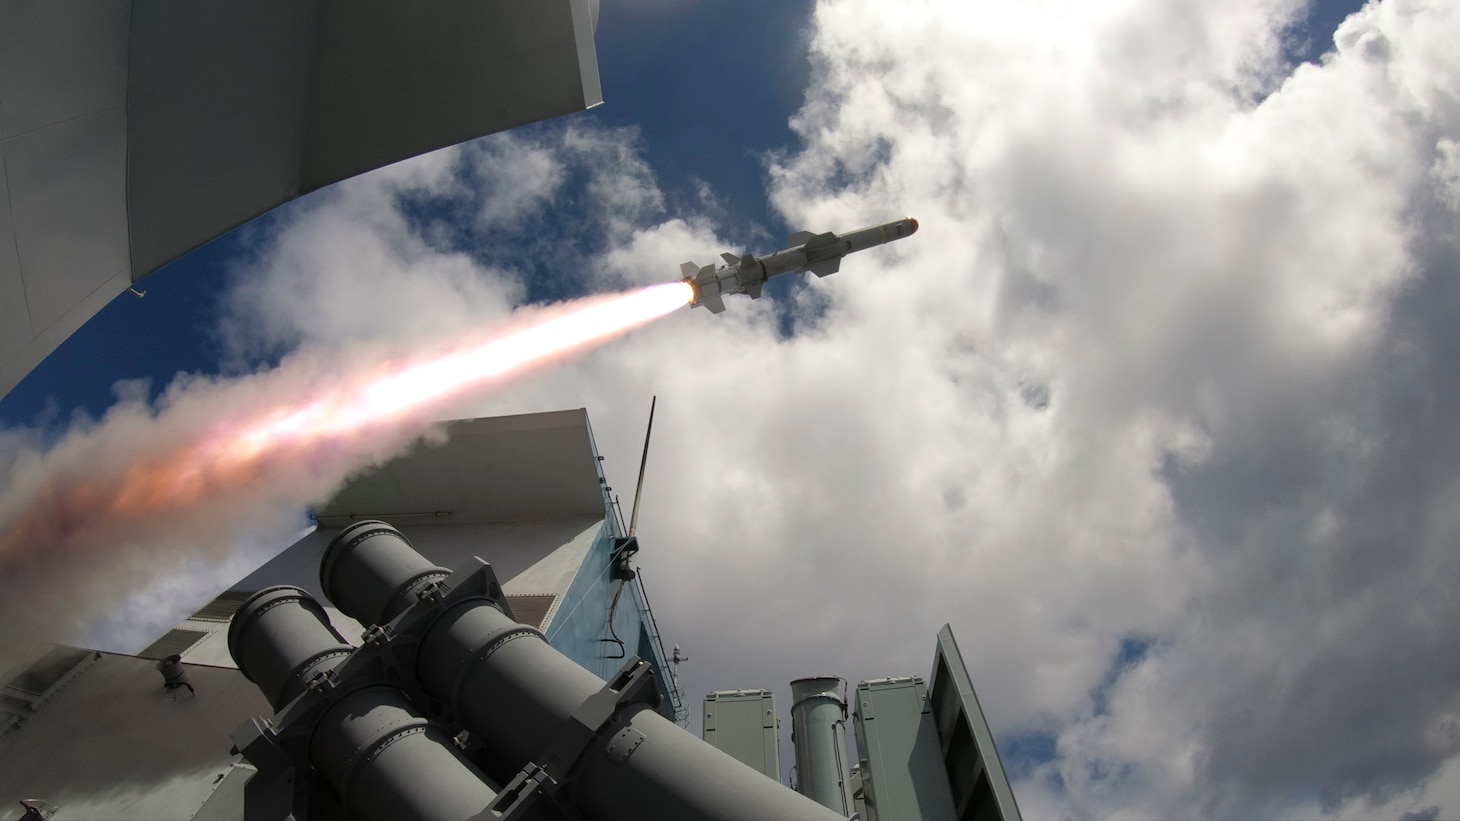 Royal Canadian Navy ship HMCS Regina (FFH 334)  fires two Harpoon Surface to Surface Missiles as part of Exercise Rim of the Pacific (RIMPAC) 2020